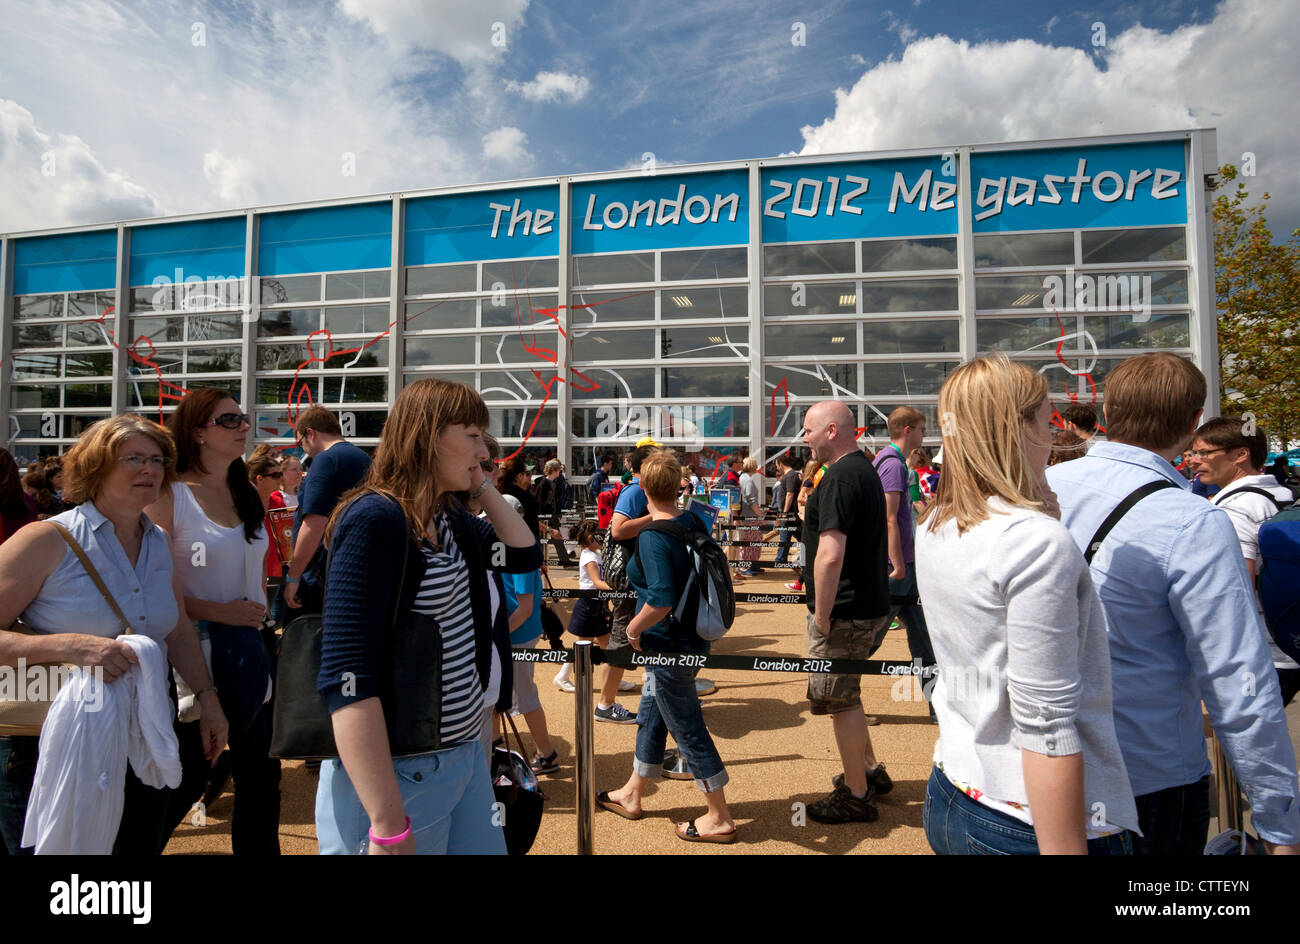 London 2012 Olympic Games - people queuing to enter London 2012 Megastore in Olympic Park Stock Photo